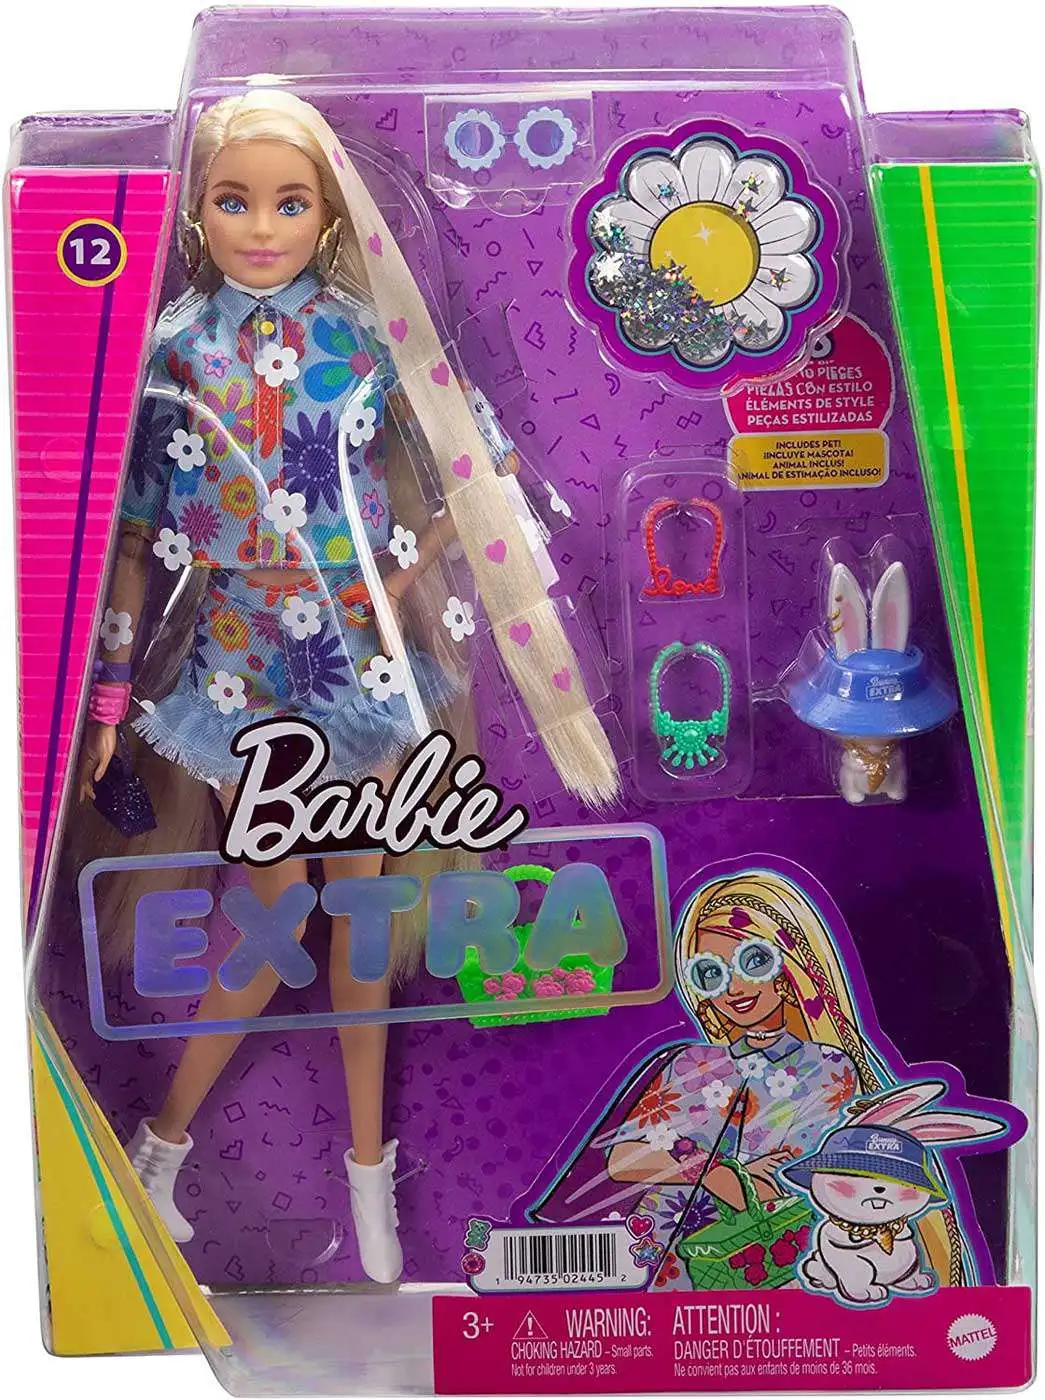 BARBIE EXTRA Doll #12 in FLORAL 2 PIECE OUTFIT PET BUNNY LONG BLONDE HAIR NEW 